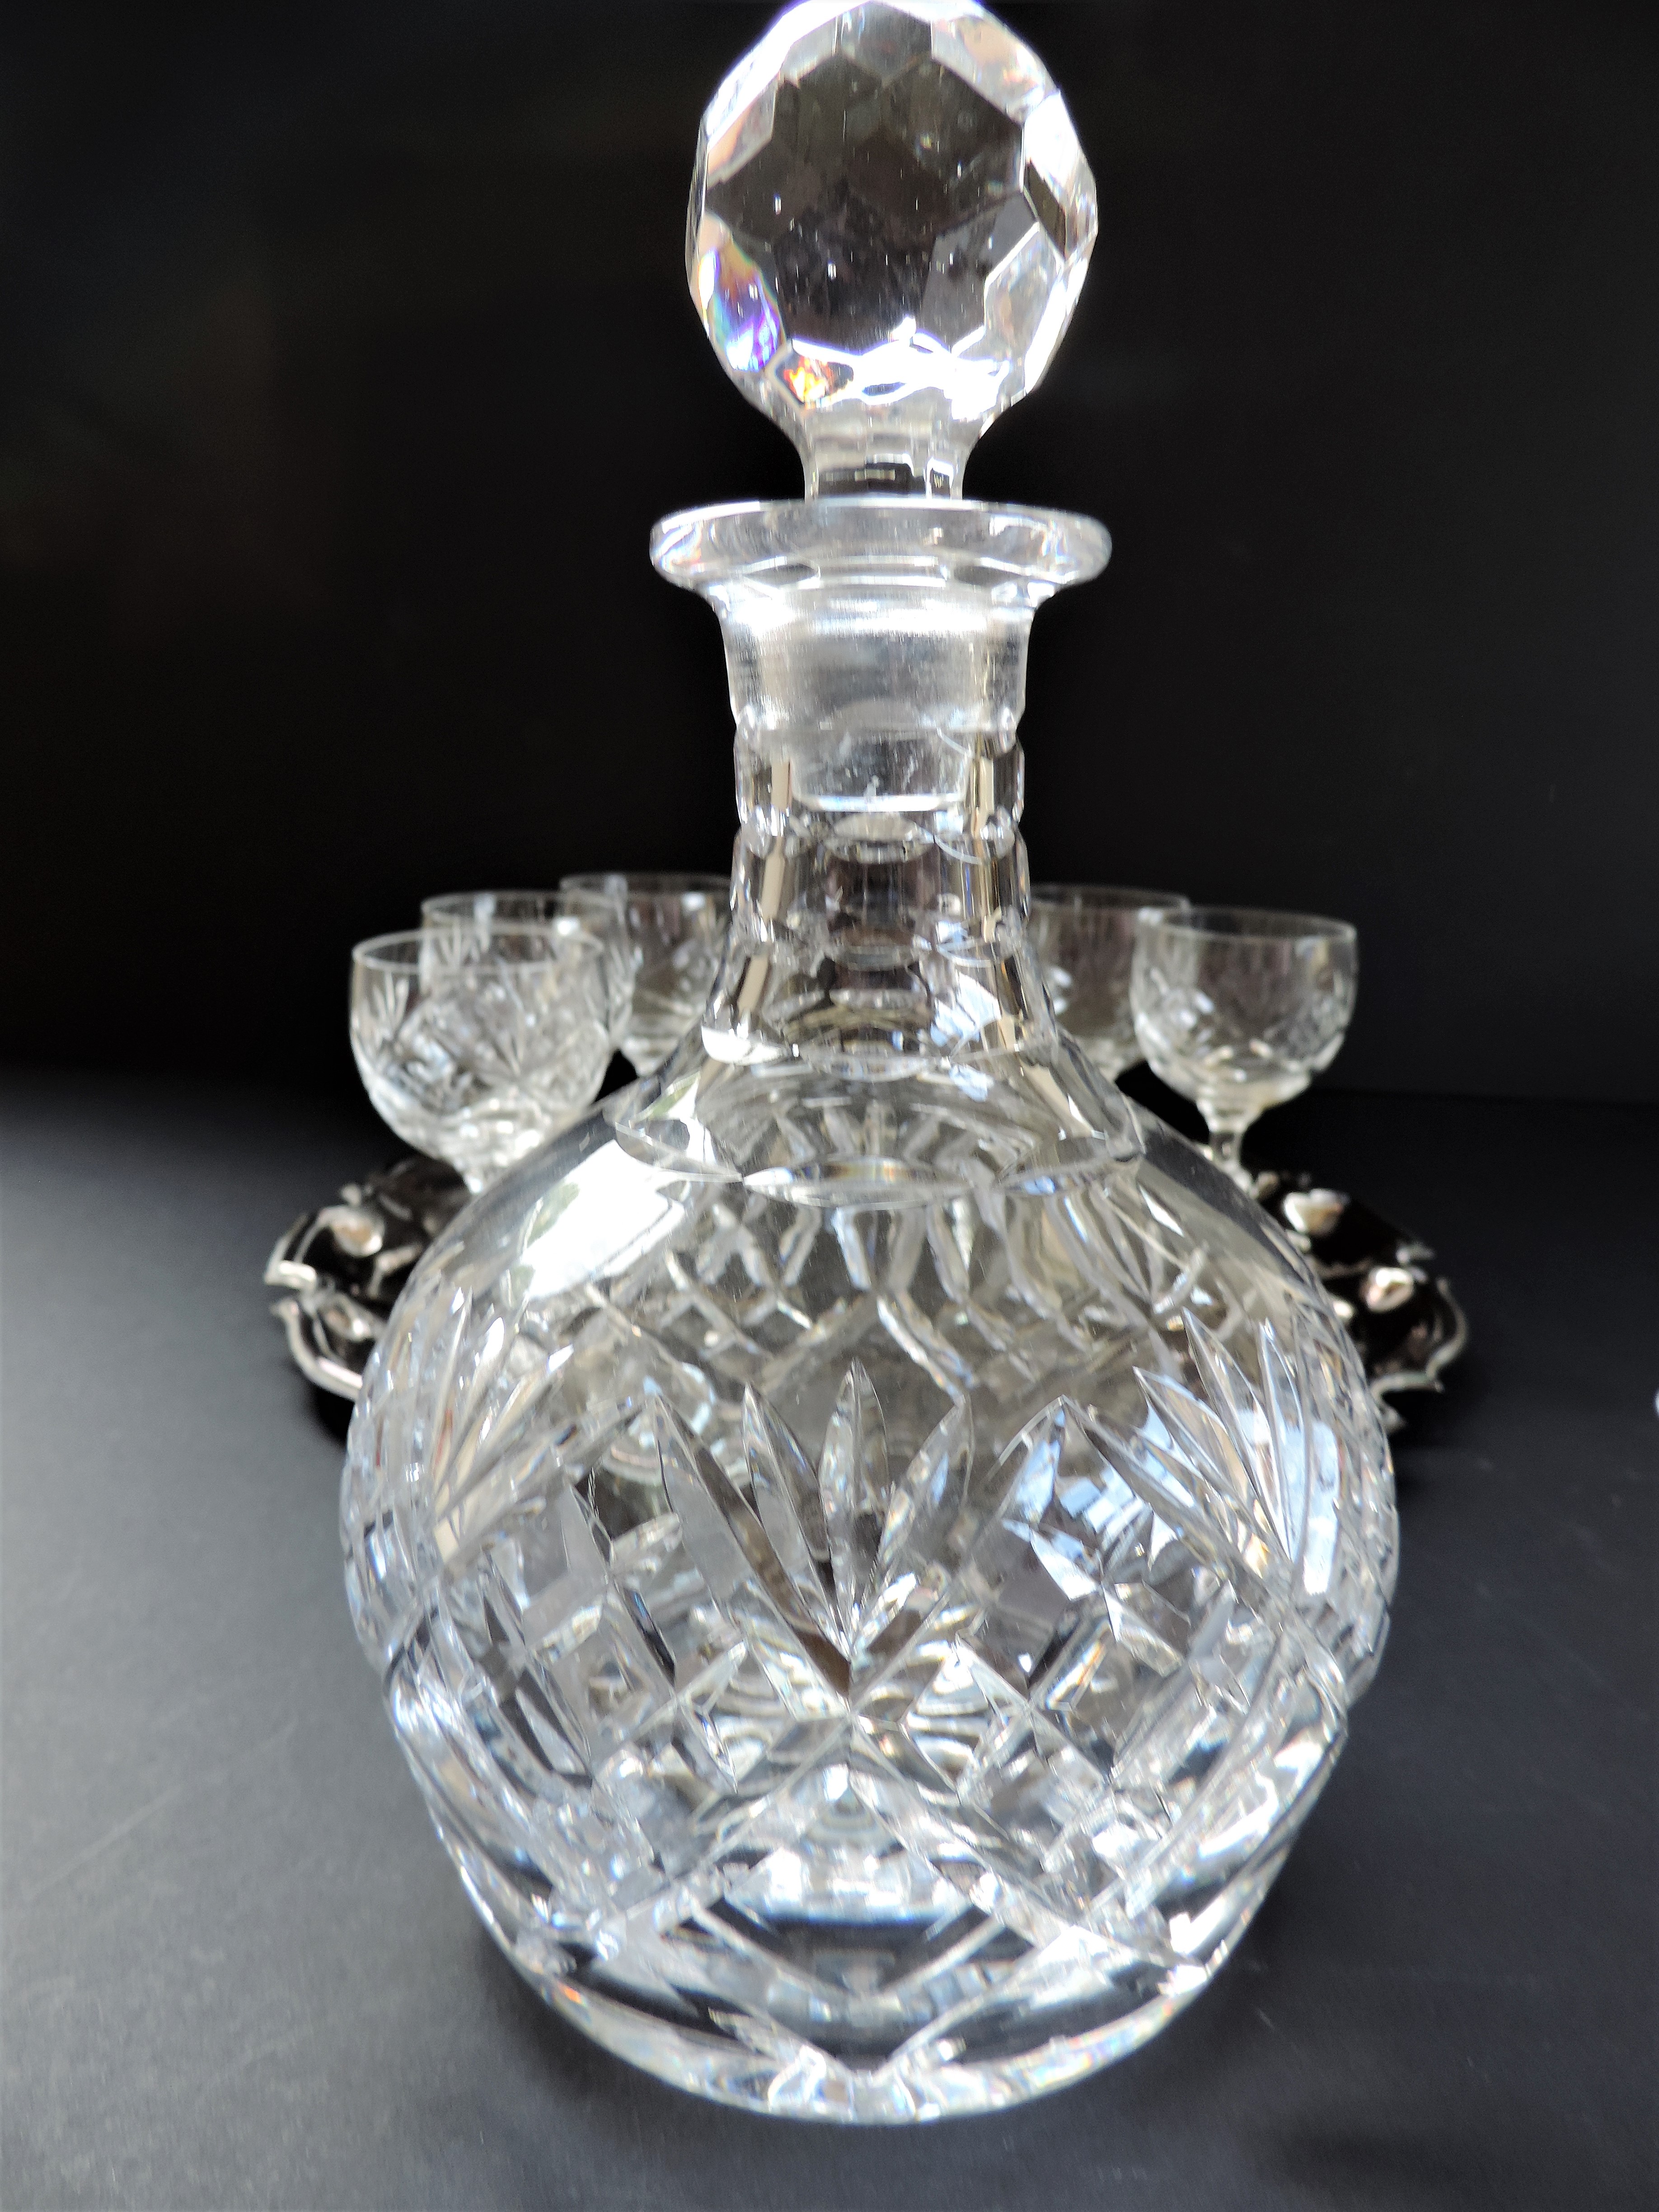 Crystal Decanter and Glasses on Silver Plate Serving Tray - Image 9 of 12